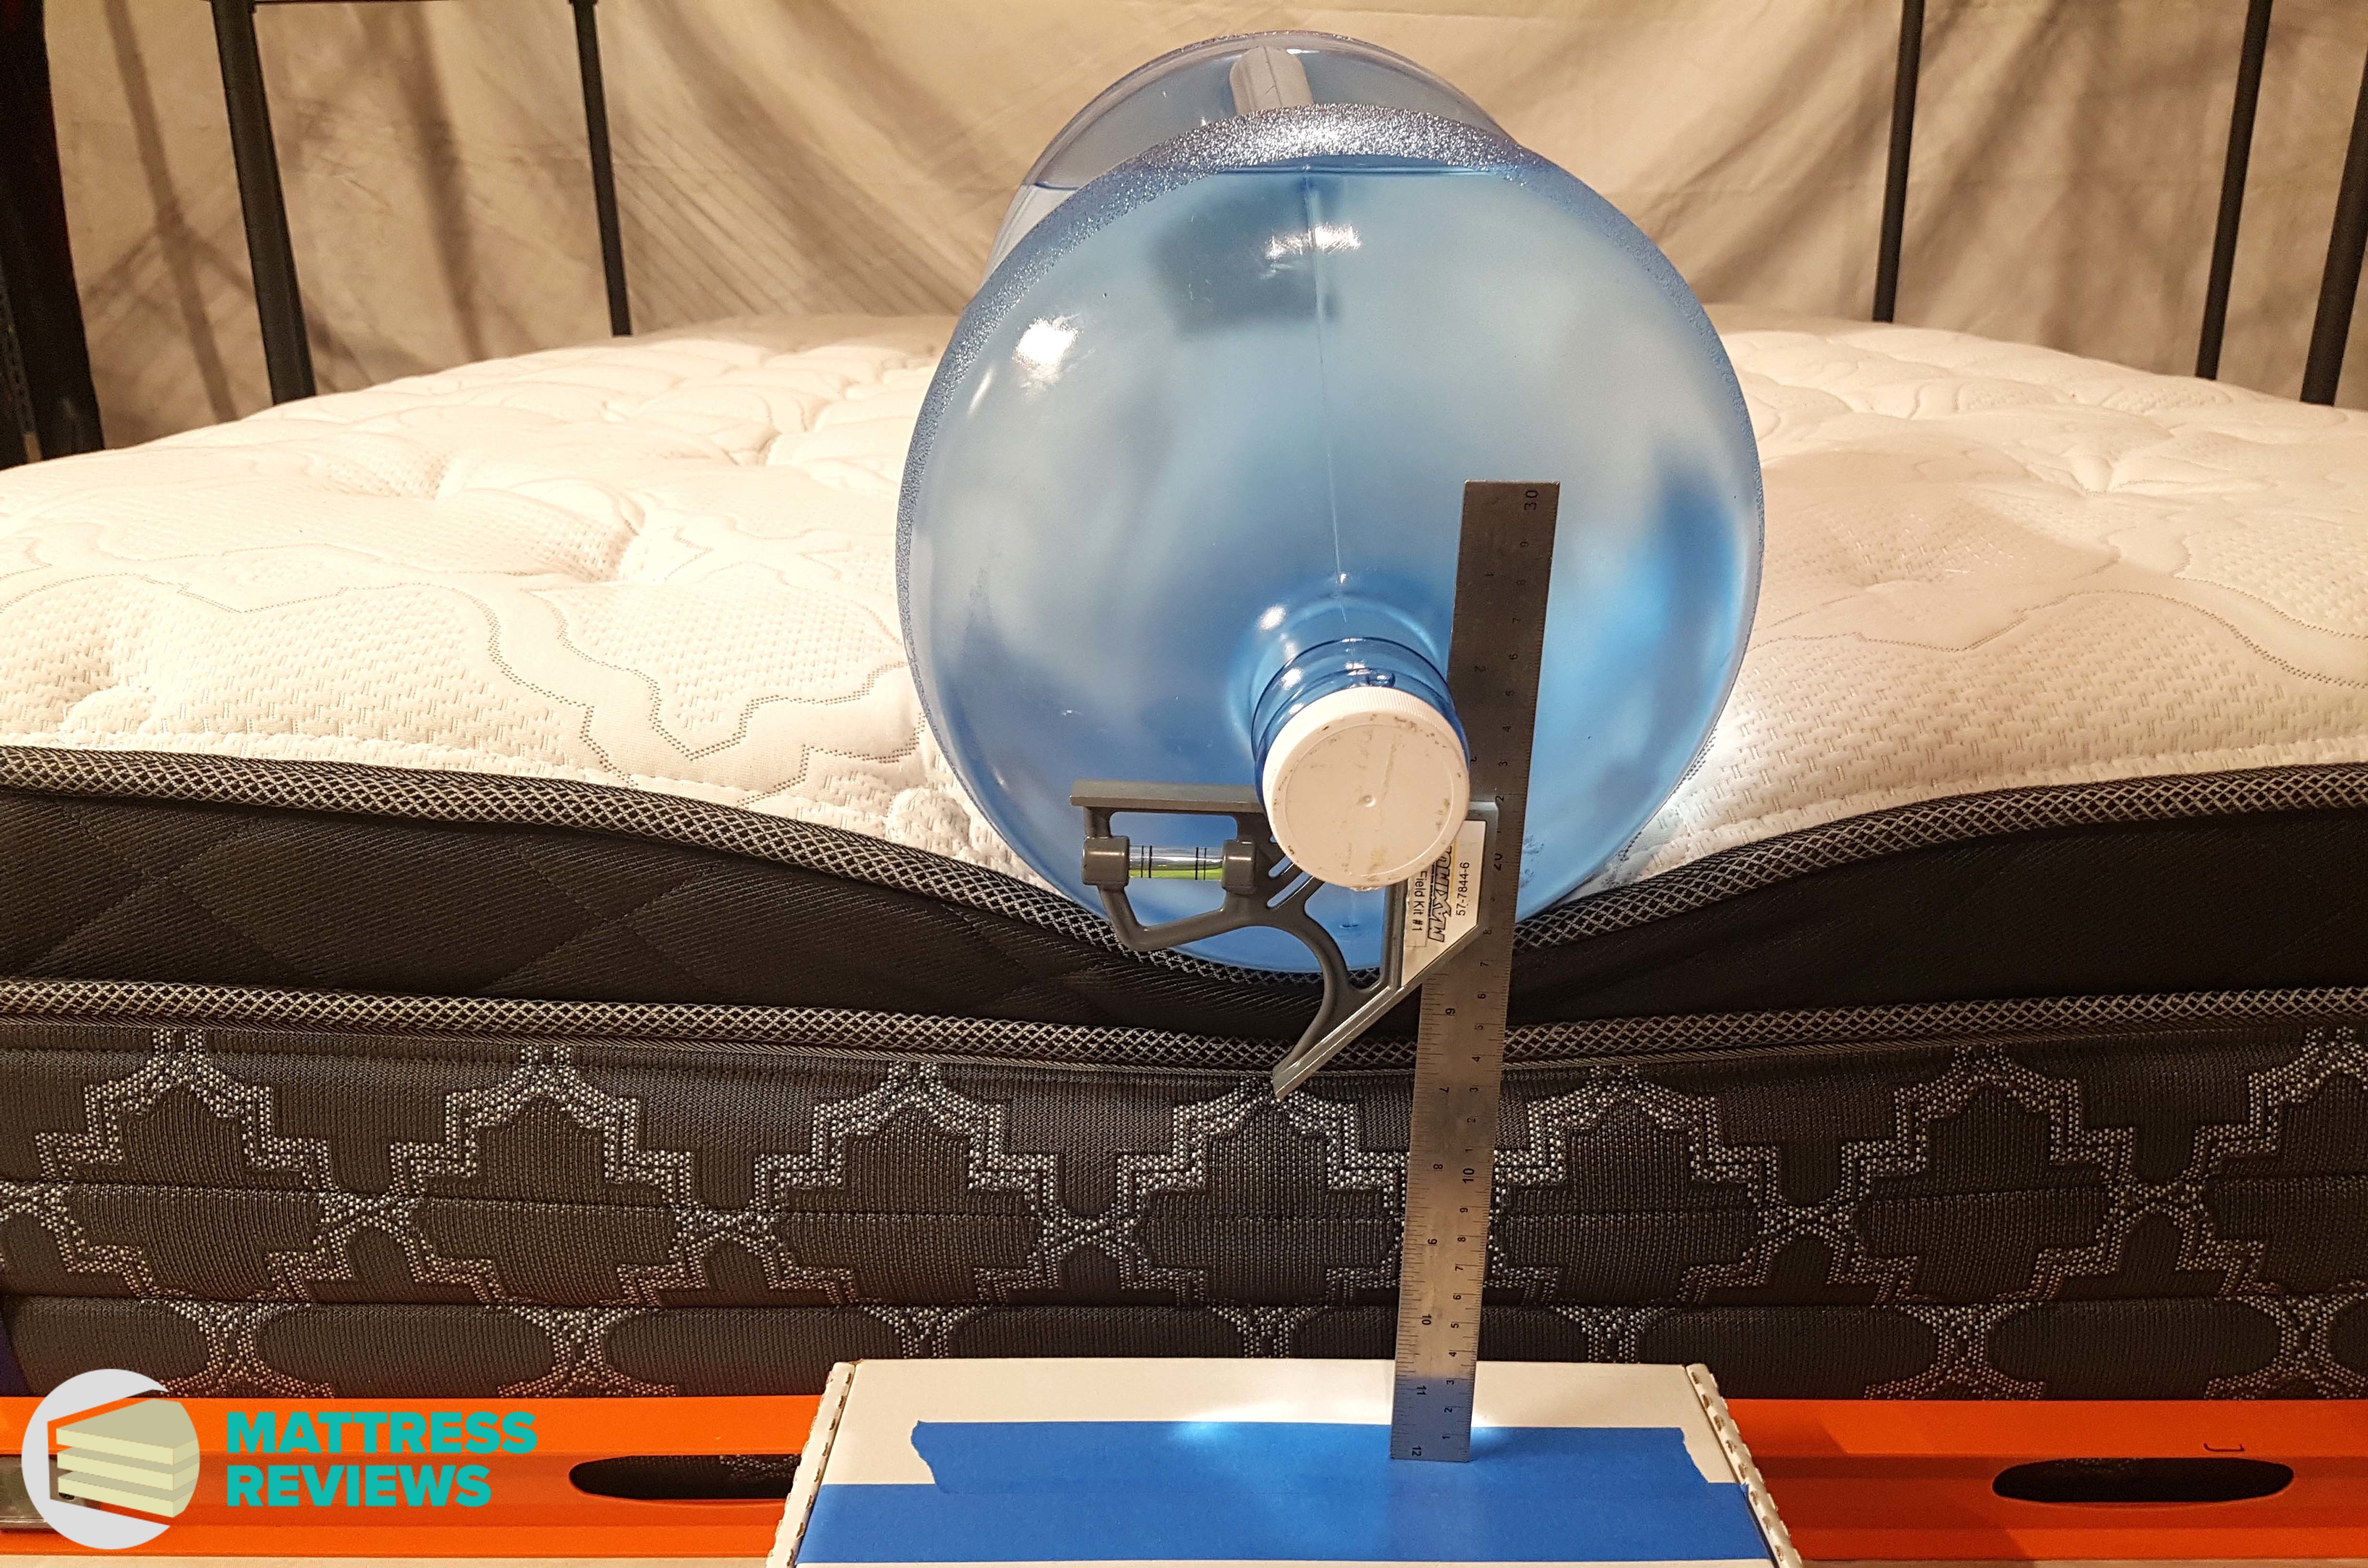 Image of the Sealy Posturepedic mattress edge support test.